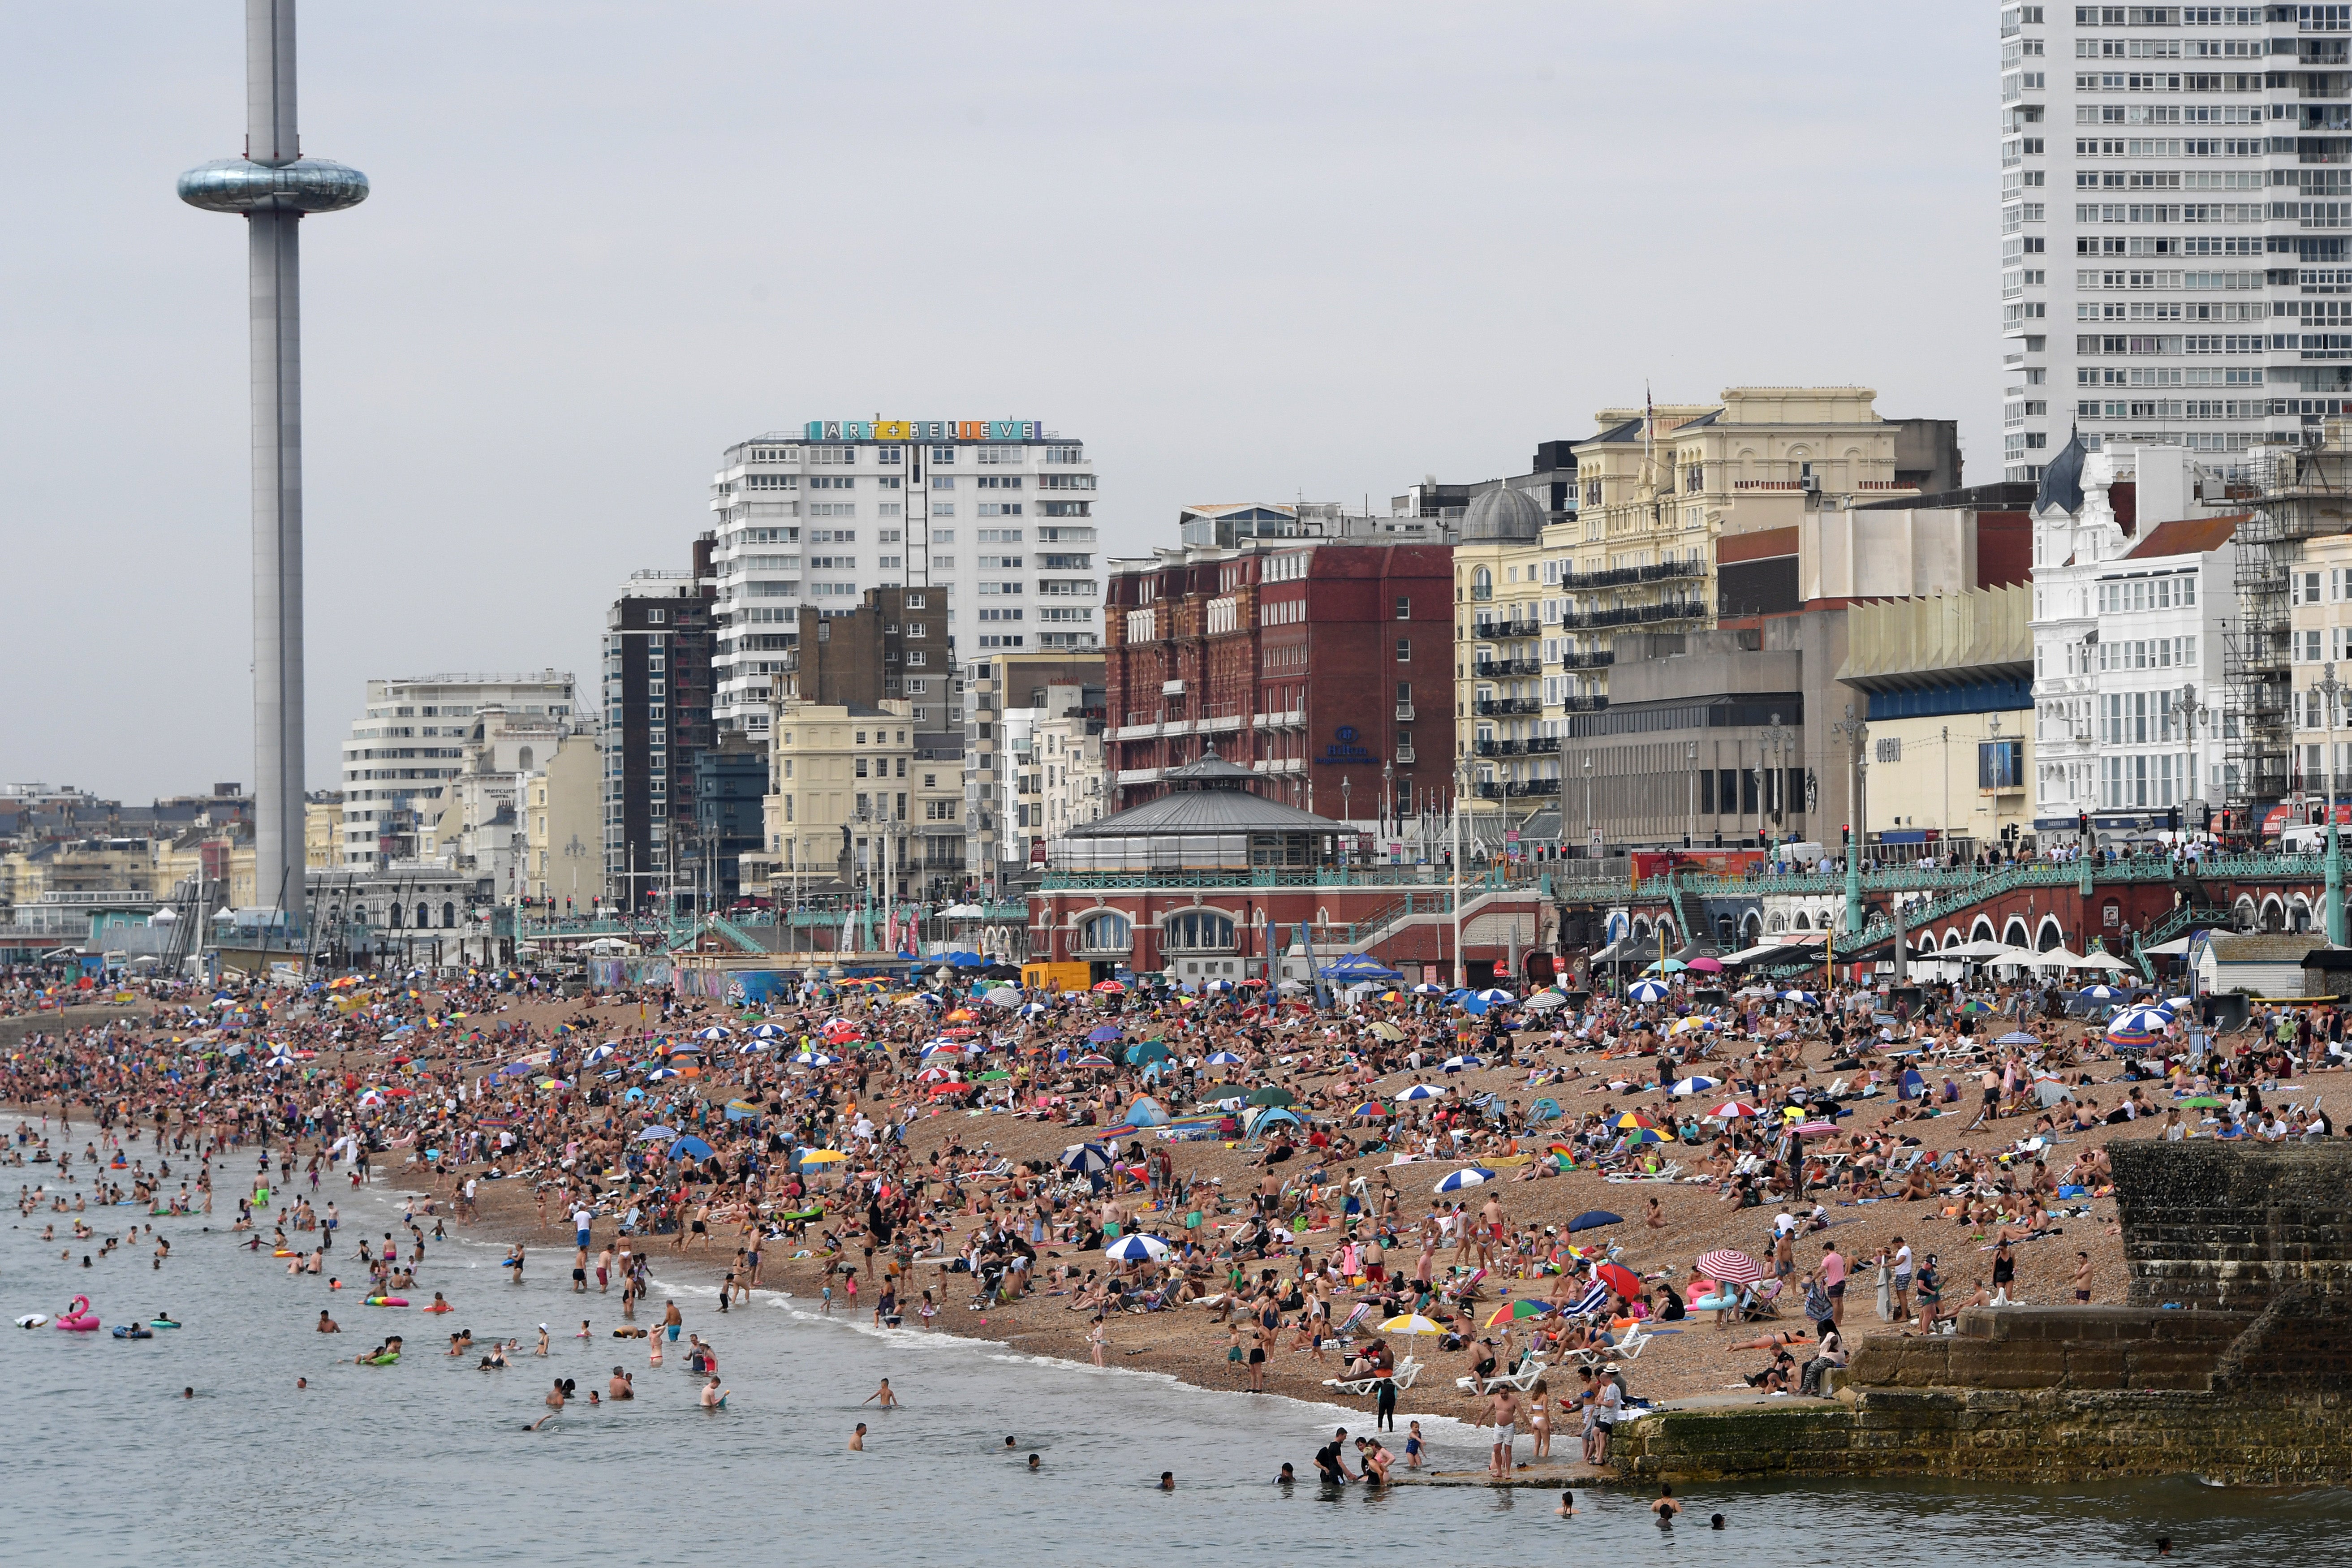 Brighton beach is packed as Britain experiences a three-day summer heatwave in August 2020, with temperatures reaching up to 38C in the South East